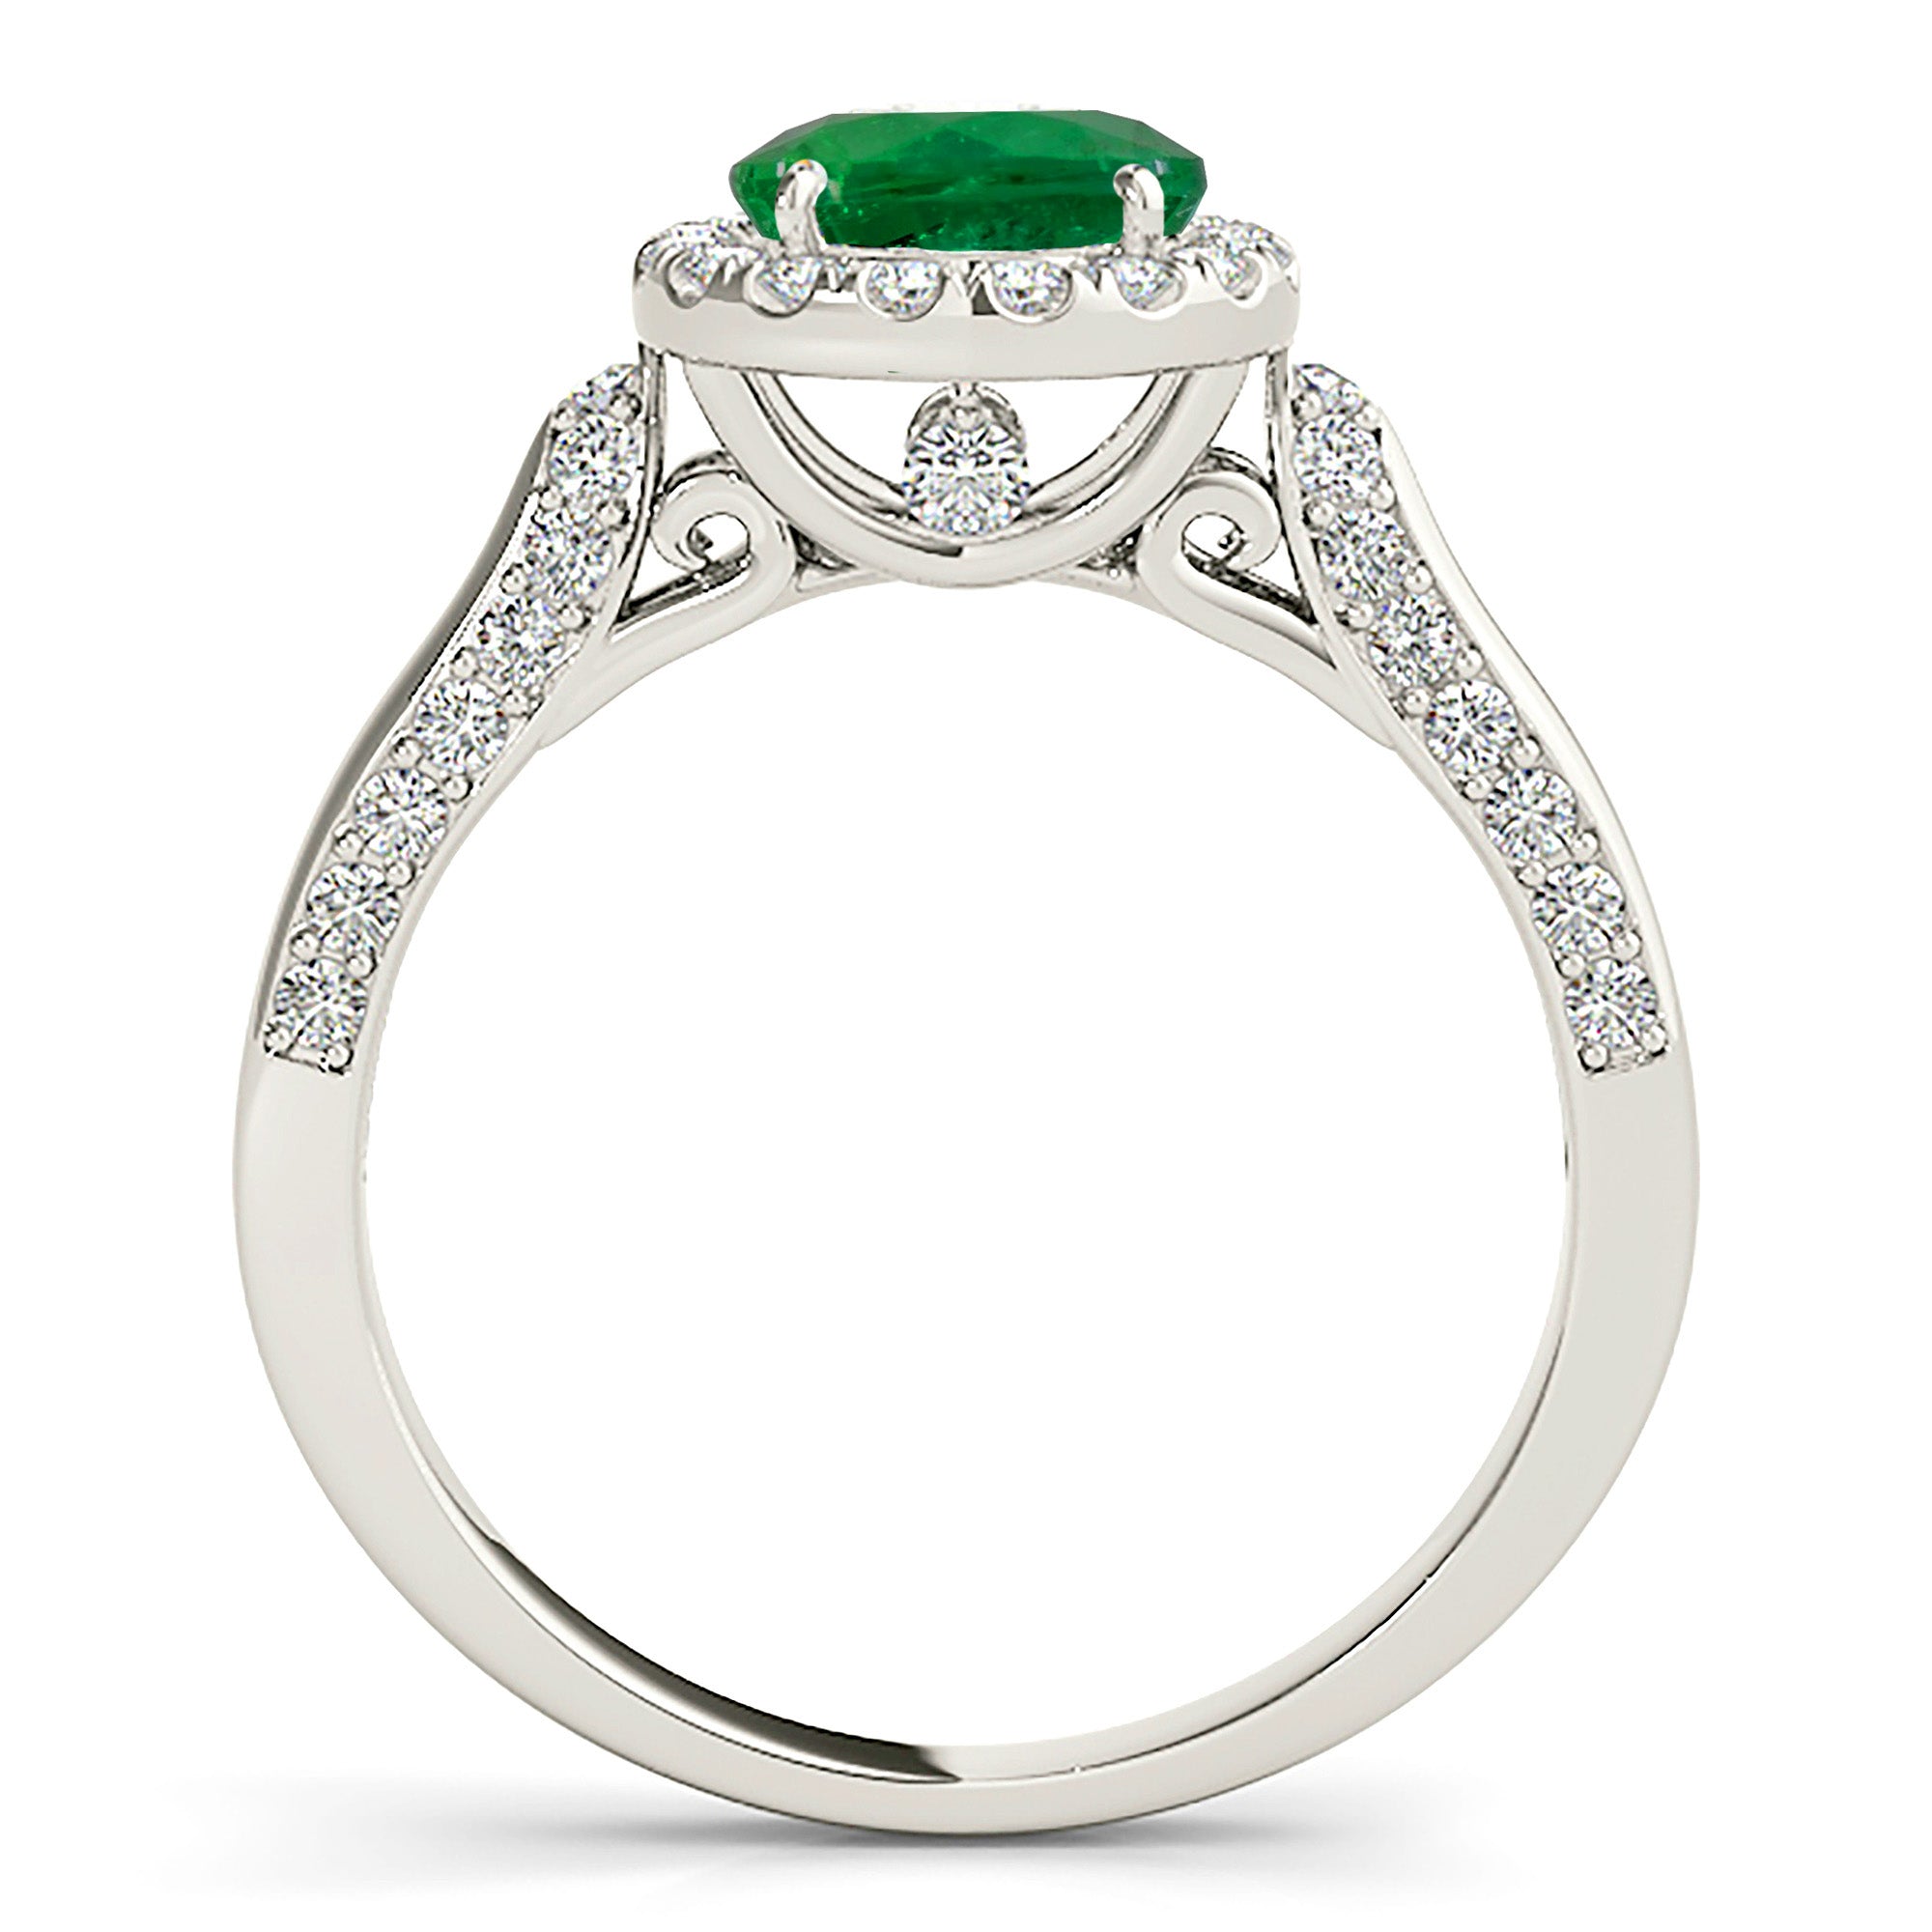 1.75 ct. Genuine Emerald Ring with 0.55 ctw. Diamond Halo, Pave Diamond and Solid Gold Band-in 14K/18K White, Yellow, Rose Gold and Platinum - Christmas Jewelry Gift -VIRABYANI